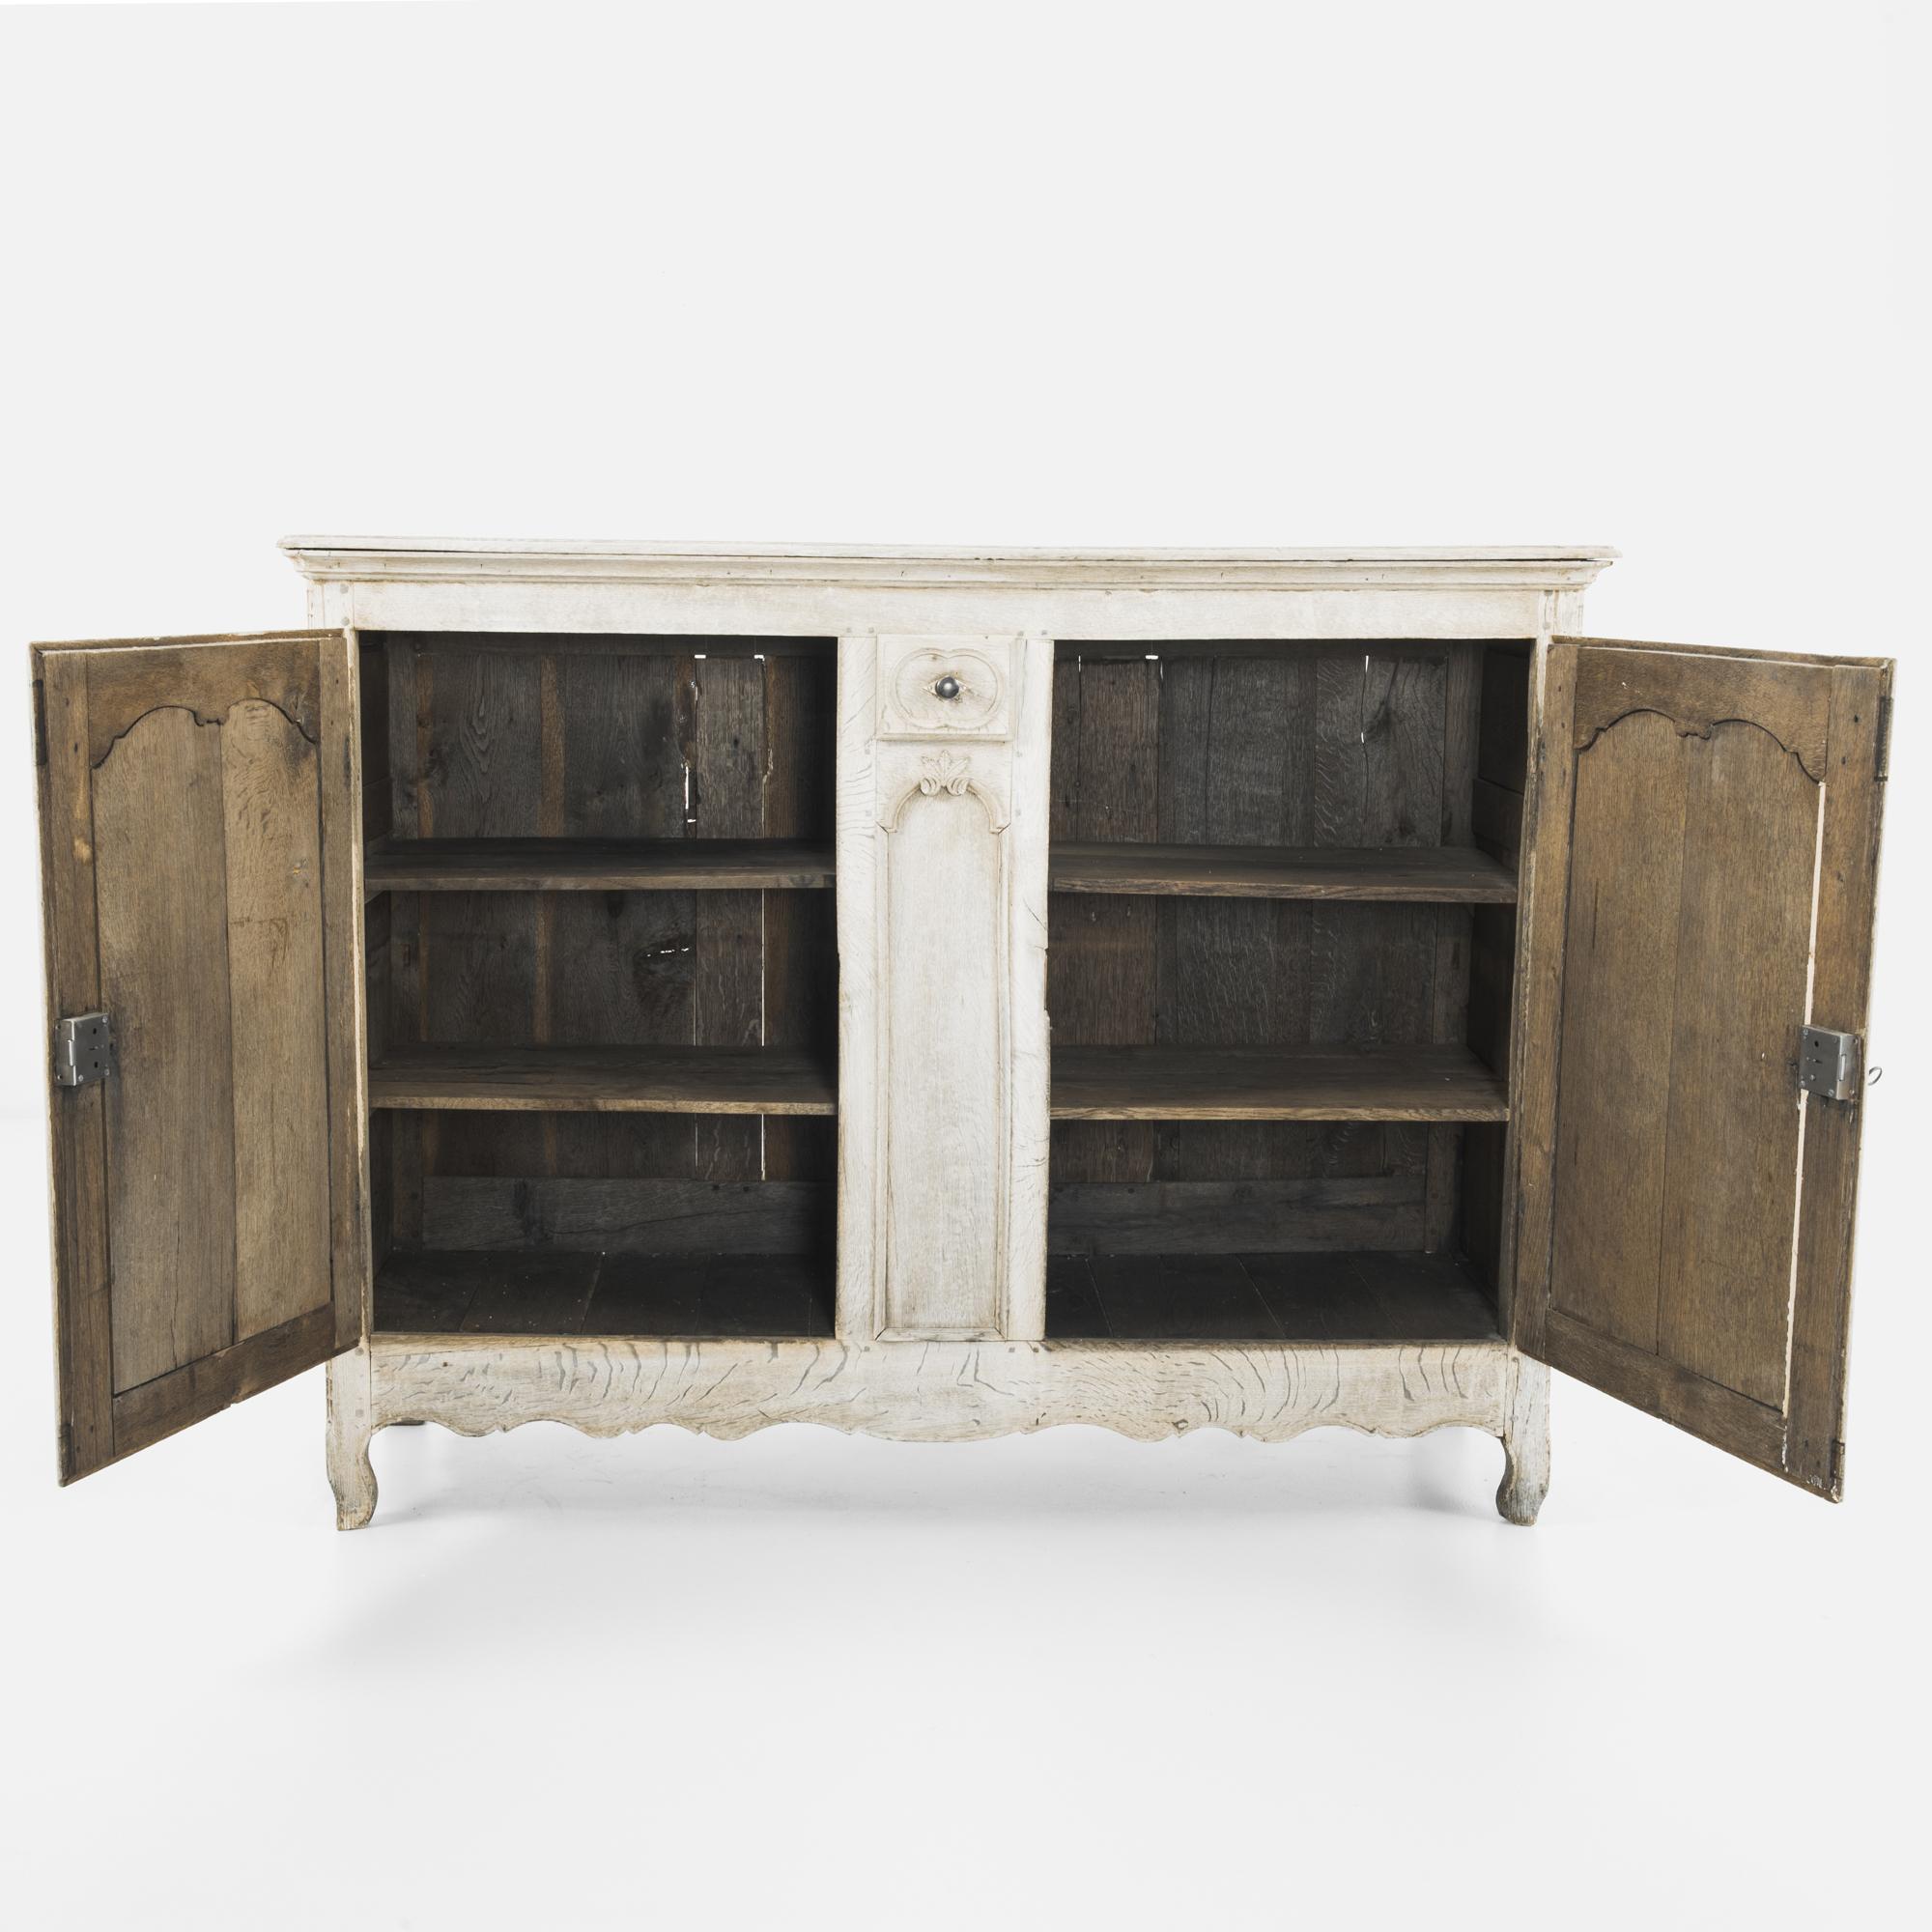 A two-door oak buffet from France, circa 1850, with a single center drawer. The upright frame is subtly embellished by the expressive raised panels on the cupboard doors and the filigree of the pulls, hinges and locks, in polished, time-worn